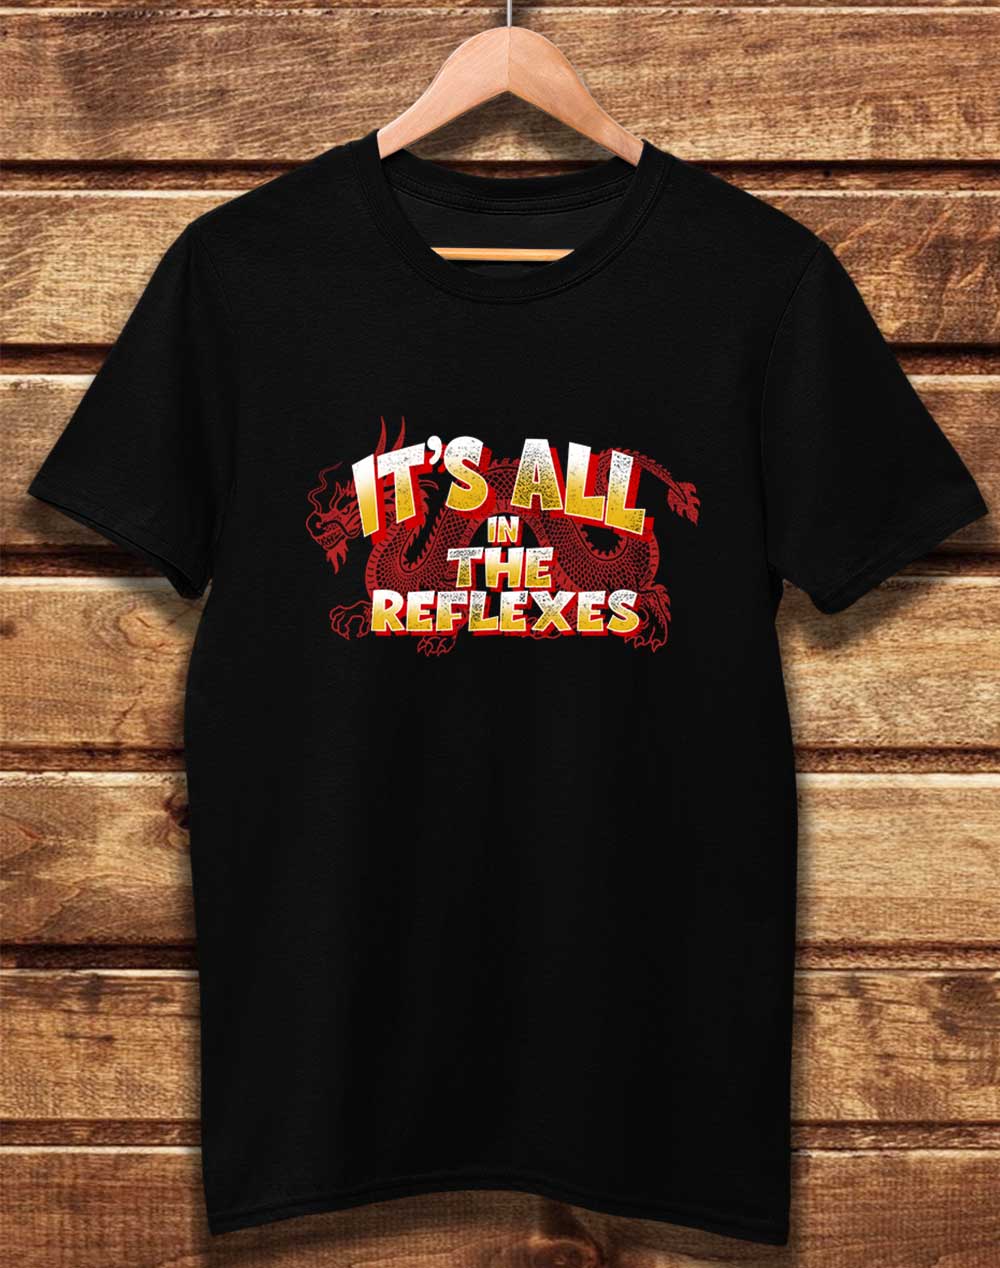 Black - DELUXE It's All in the Reflexes Organic Cotton T-Shirt